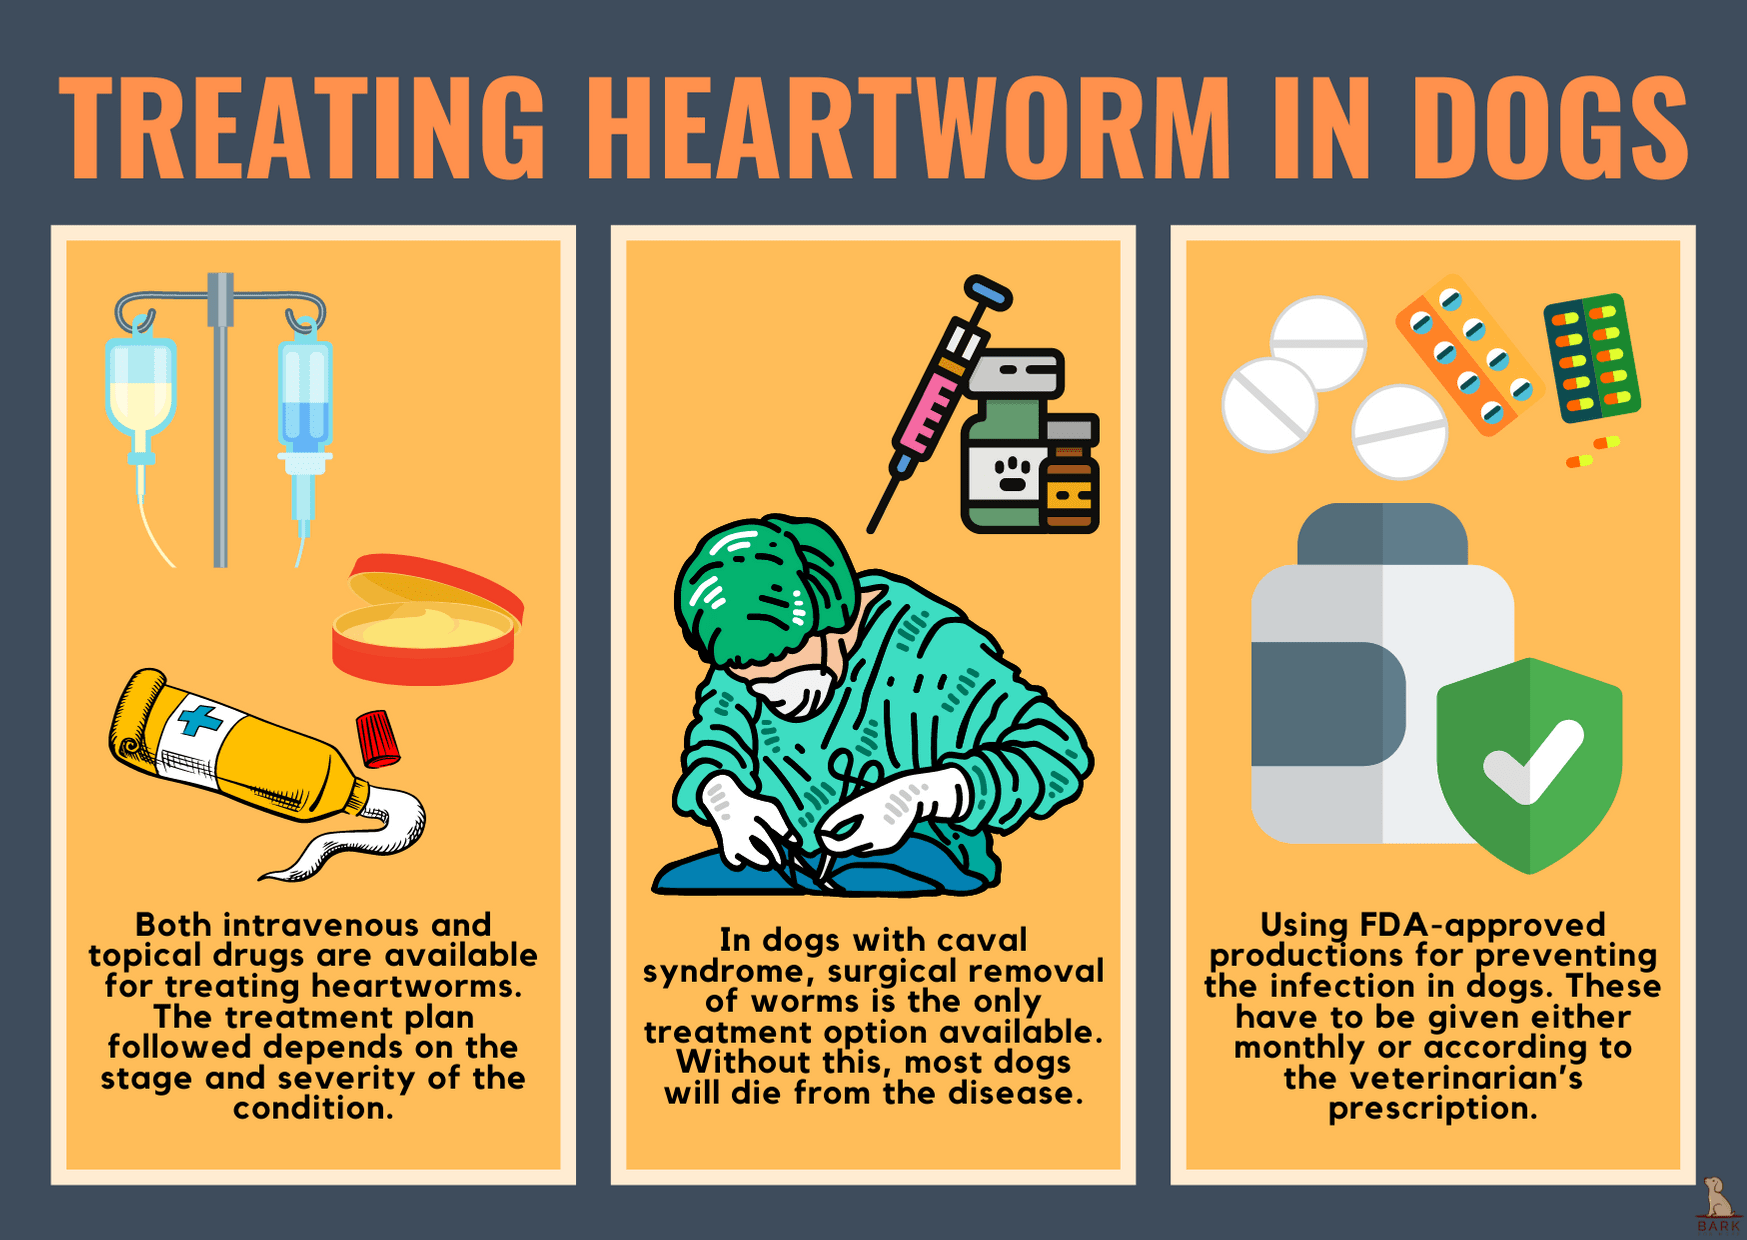 Treating heartworm in dogs 